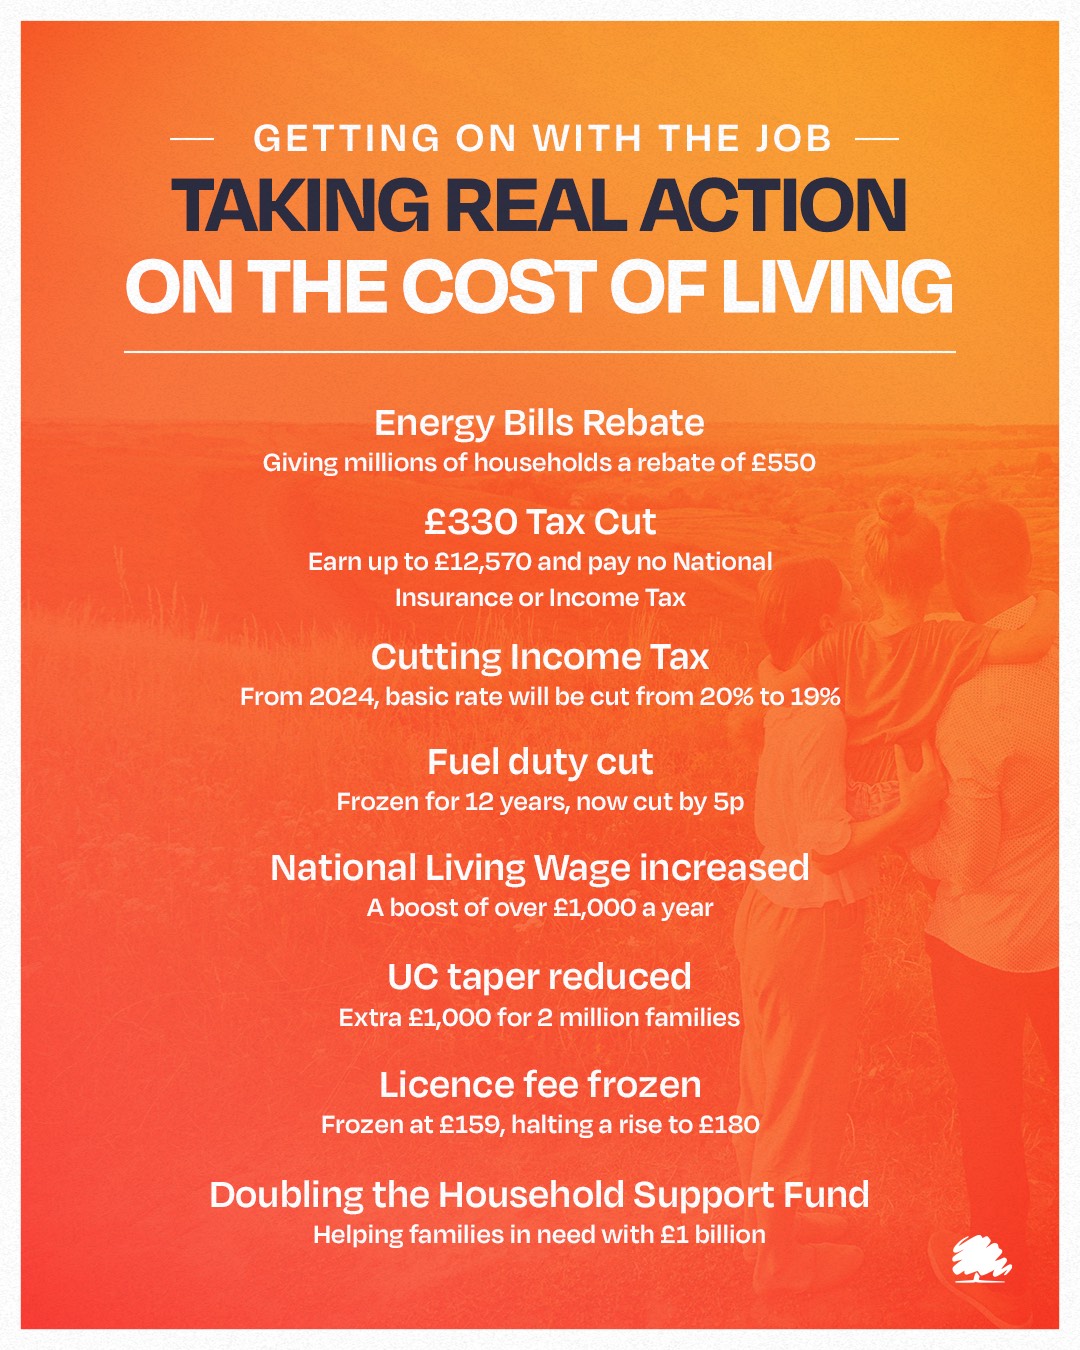 Conservative record on the cost of living